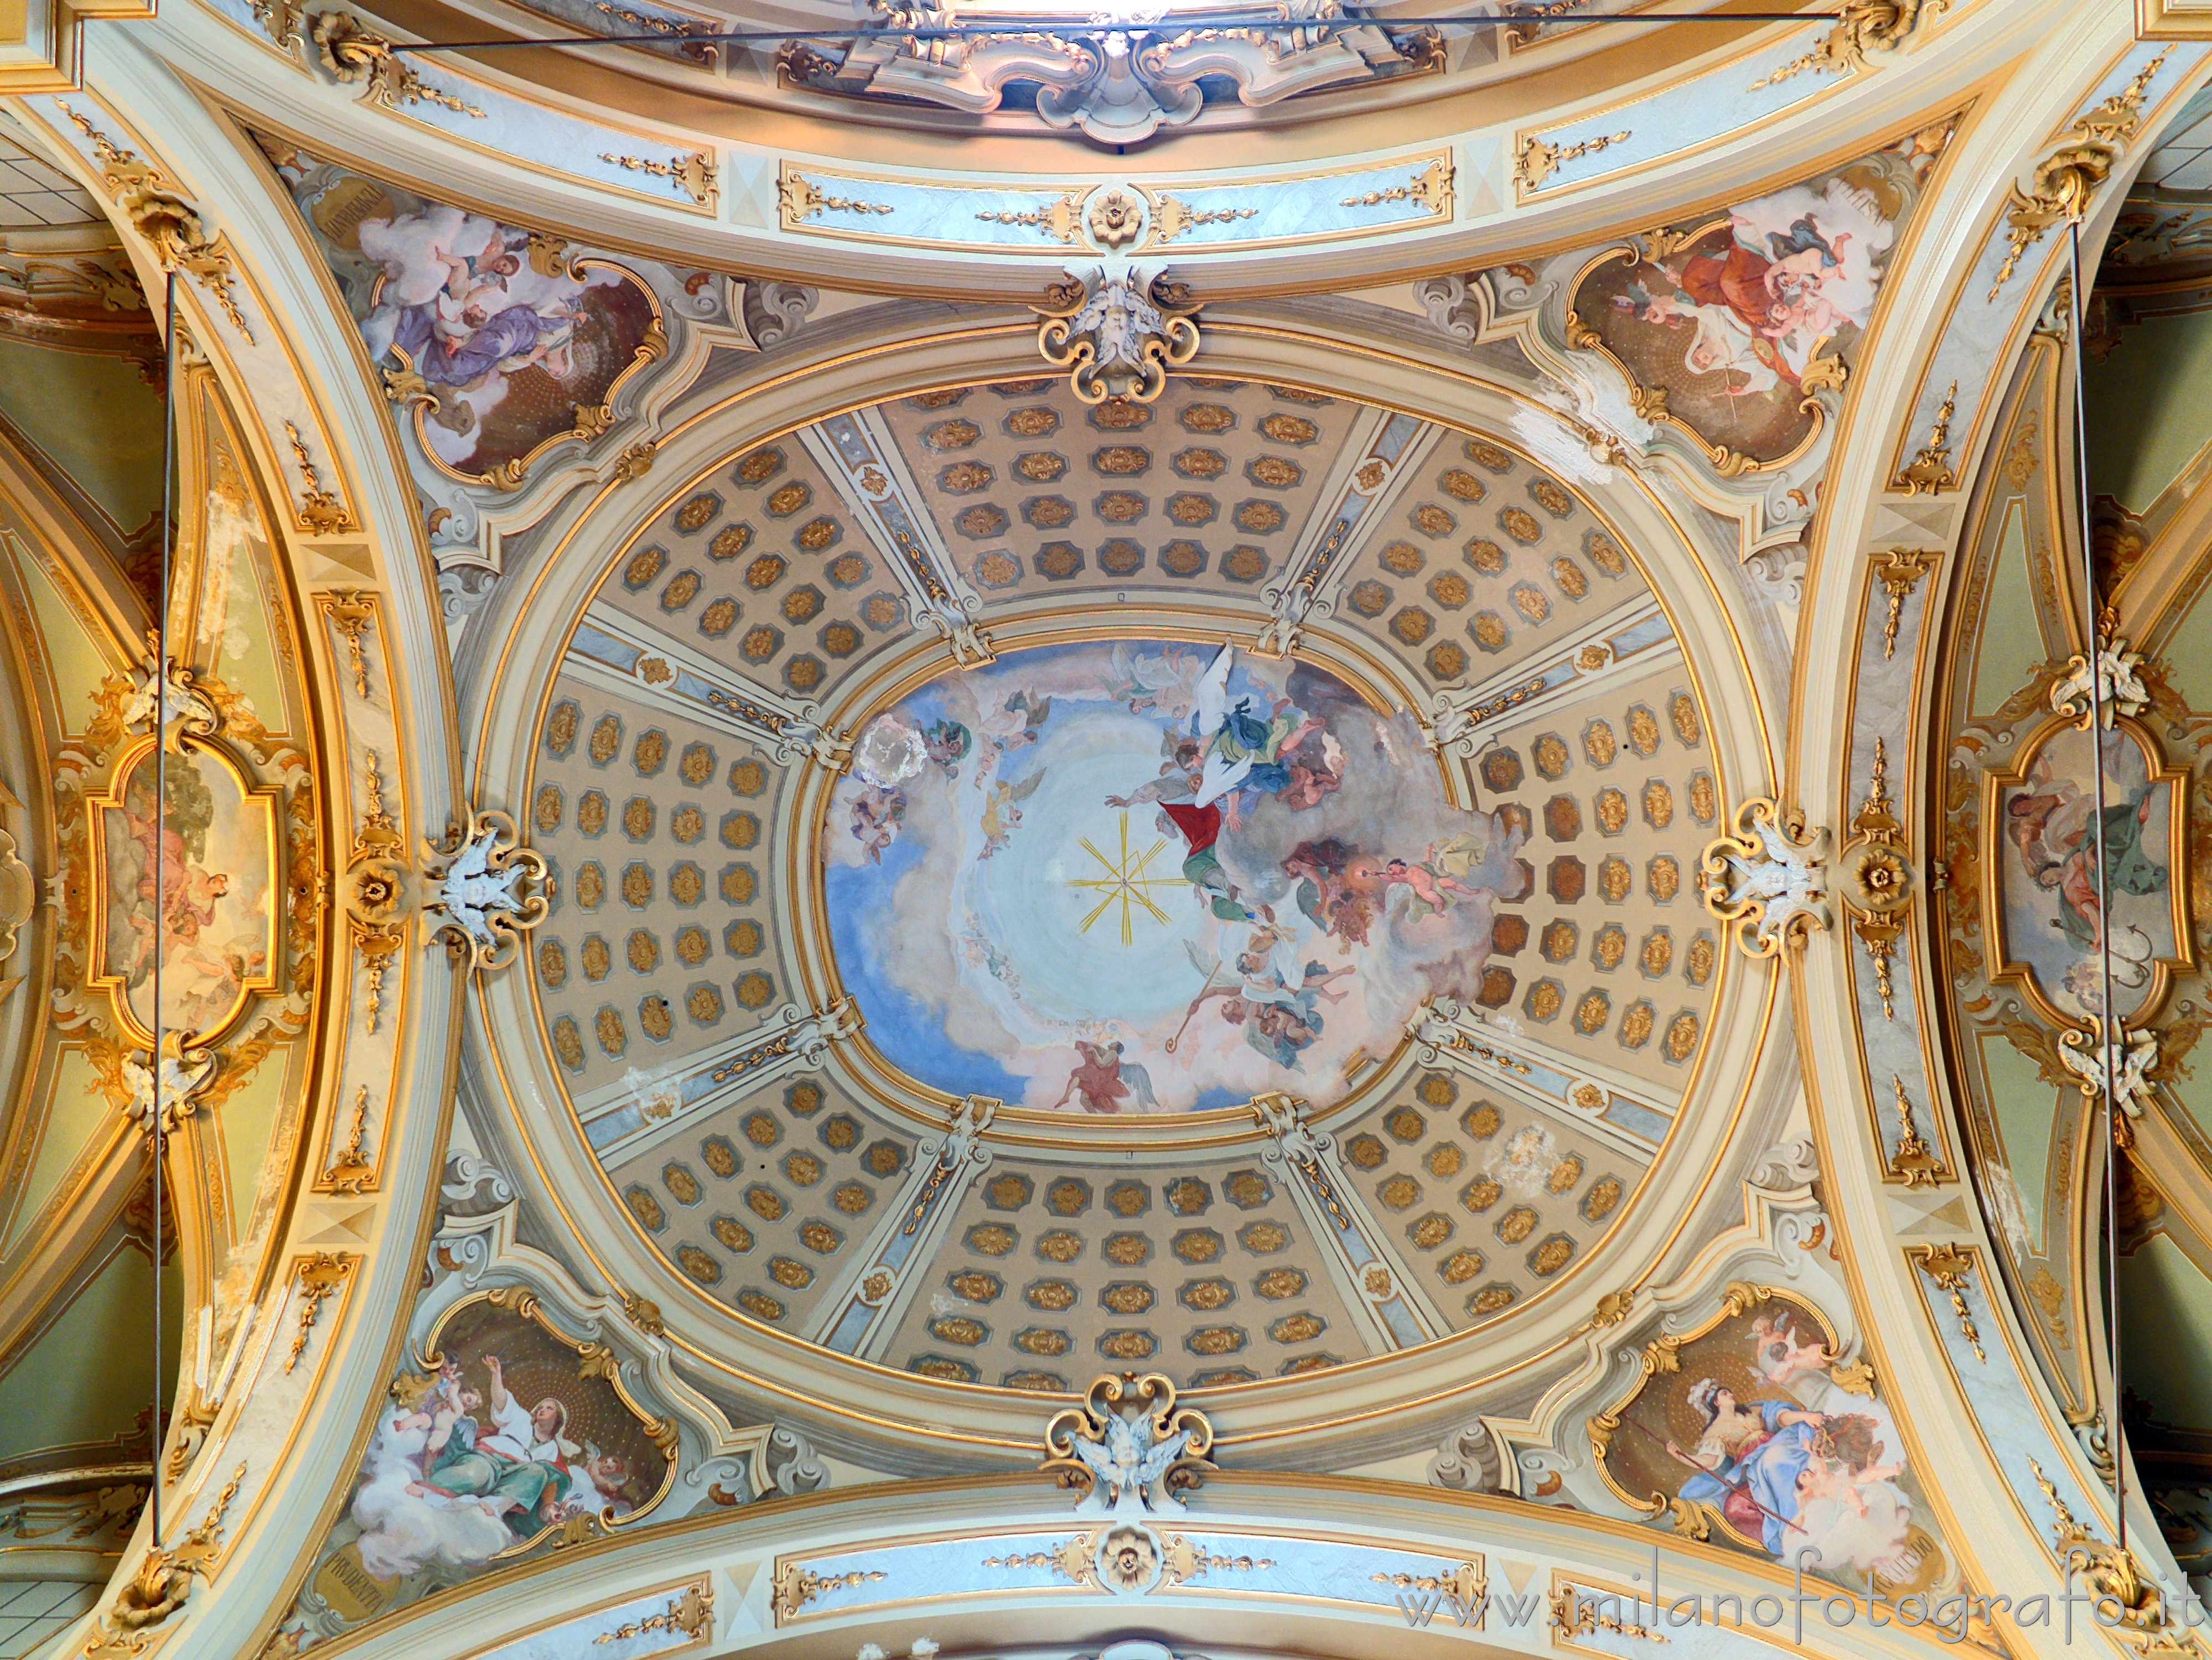 Desio (Milan, Italy): Detail of the ceiling of the Basilica of the Saints Siro and Materno - Desio (Milan, Italy)